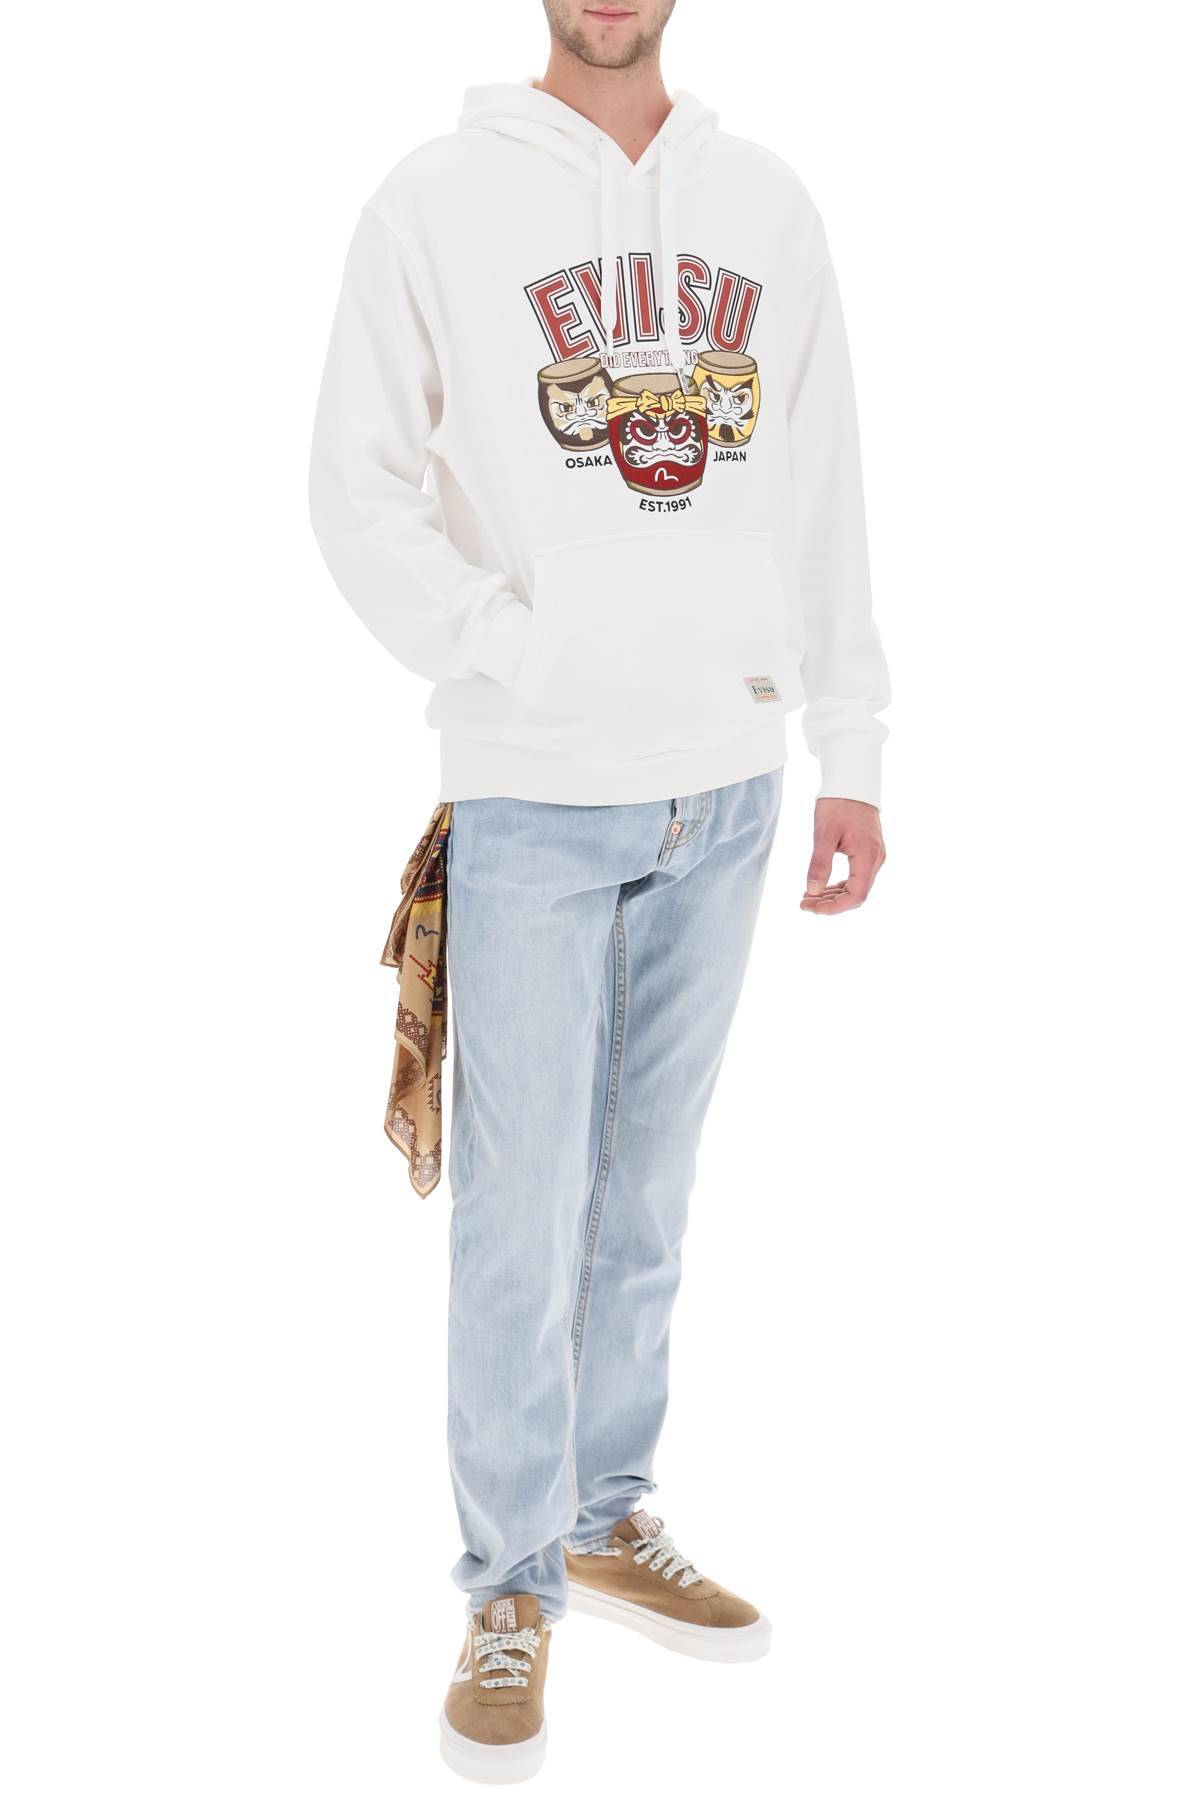 Shop Evisu Hoodie With Embroidery And Print In White